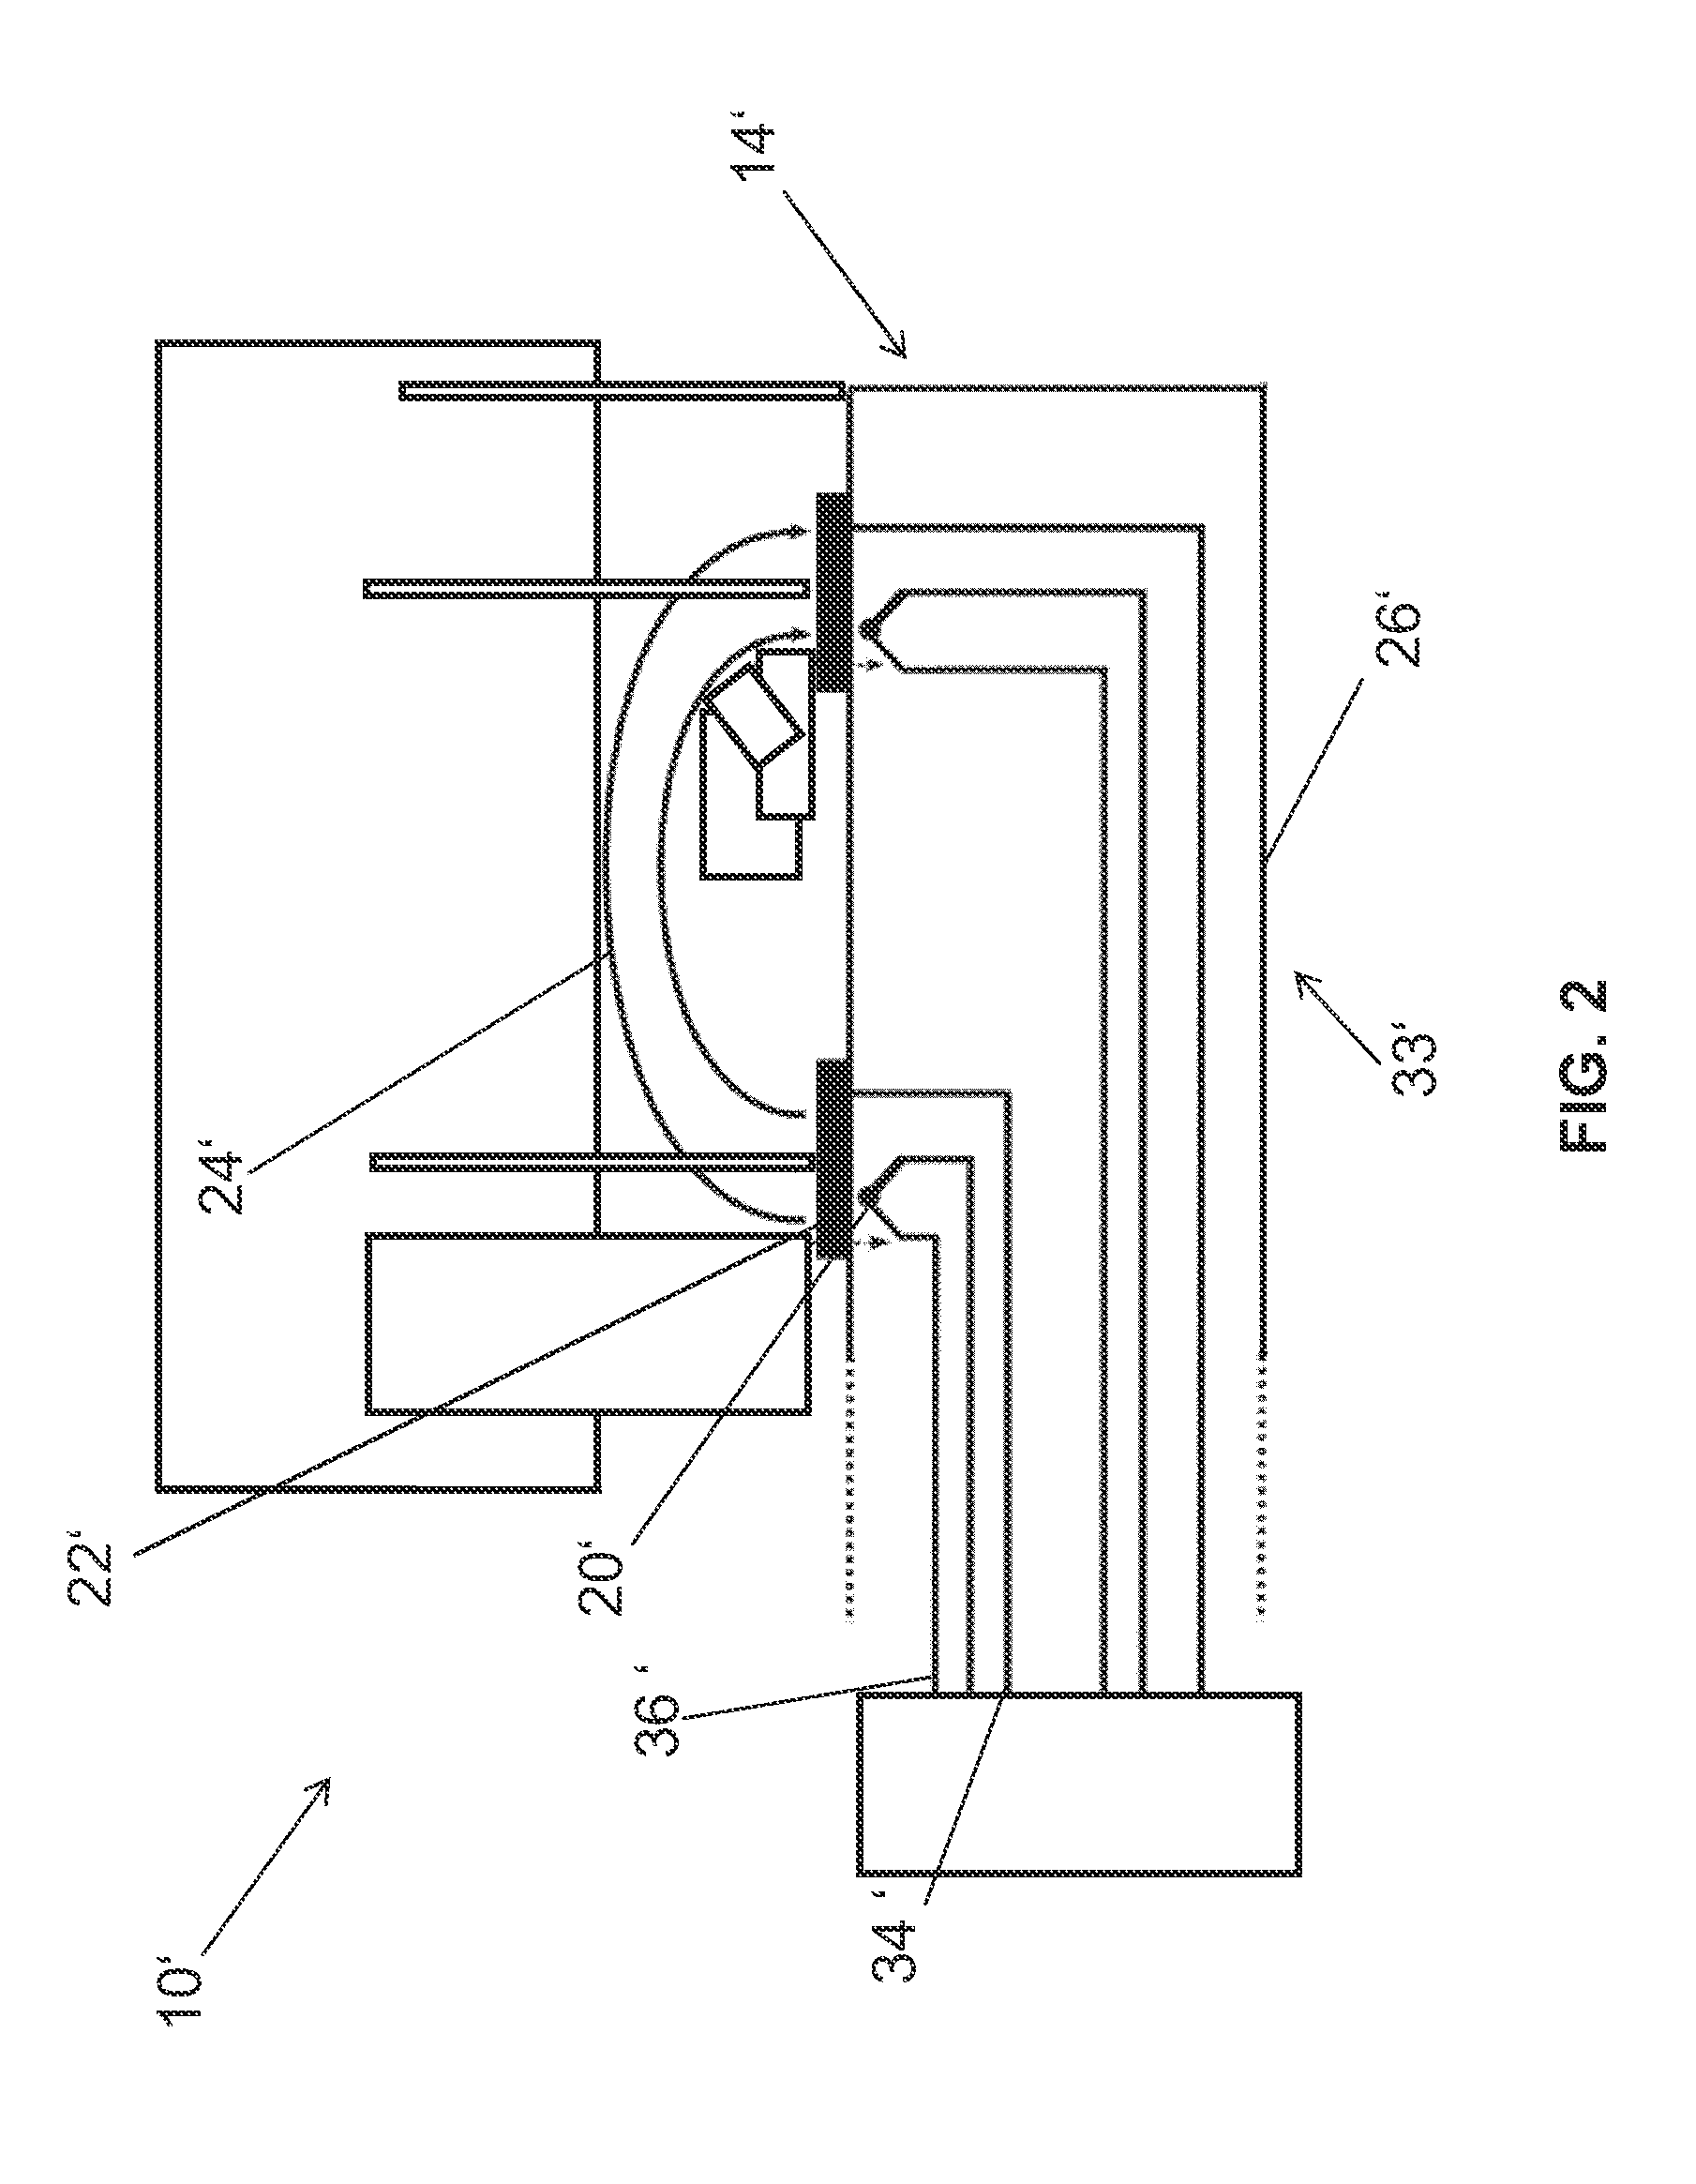 Medical device for evaluating a temperature signal